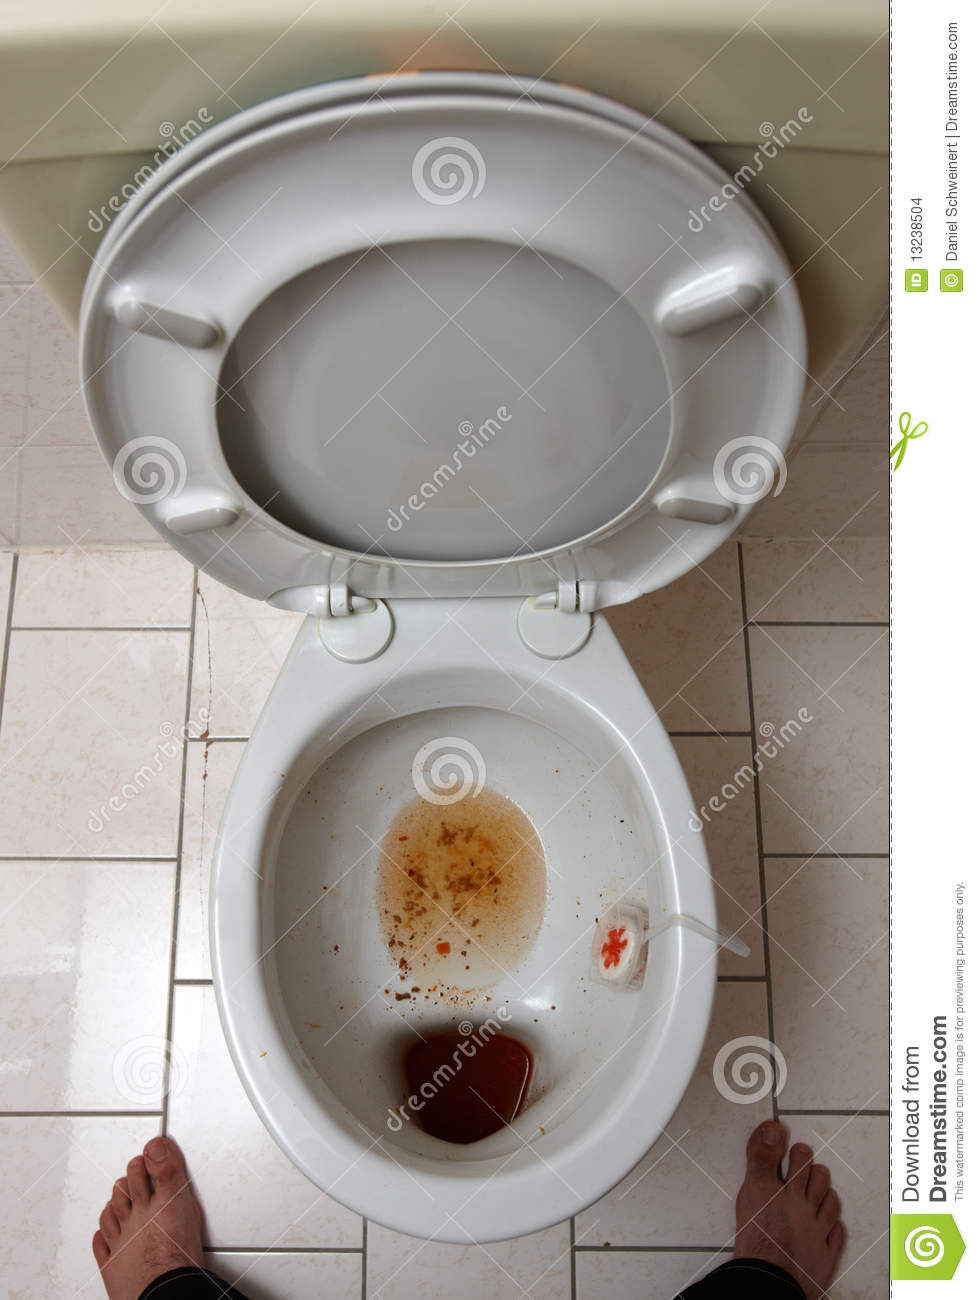 Dirty Toilet Stock Images   Image  13238504